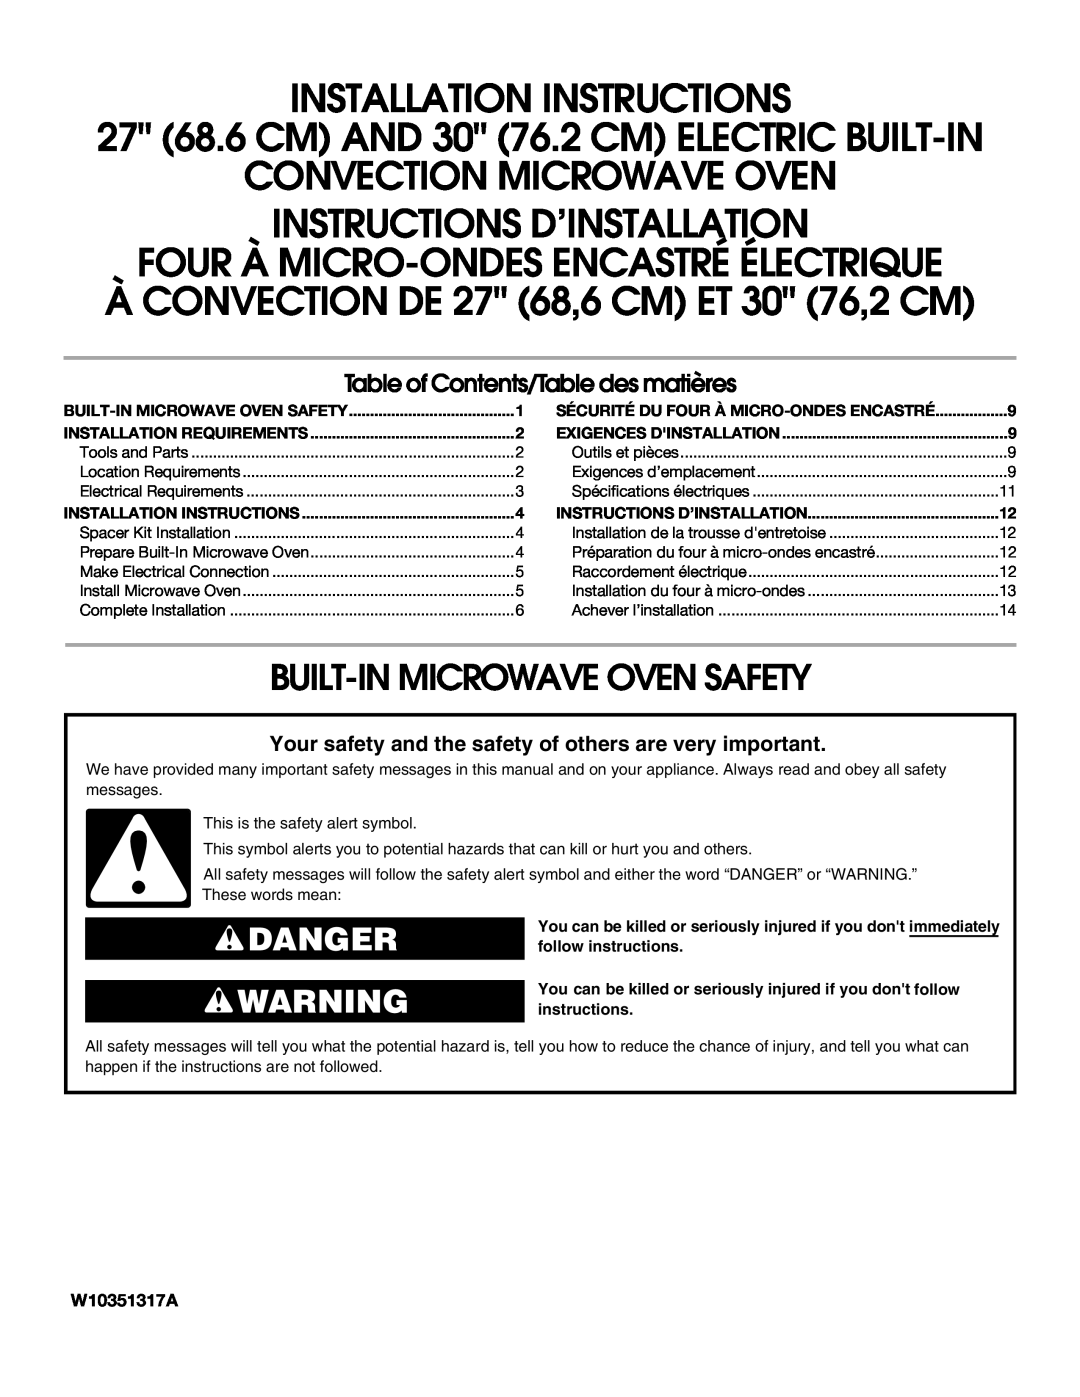 KitchenAid W10351317A installation instructions Built-In Microwave Oven Safety, Danger, Installation Requirements 